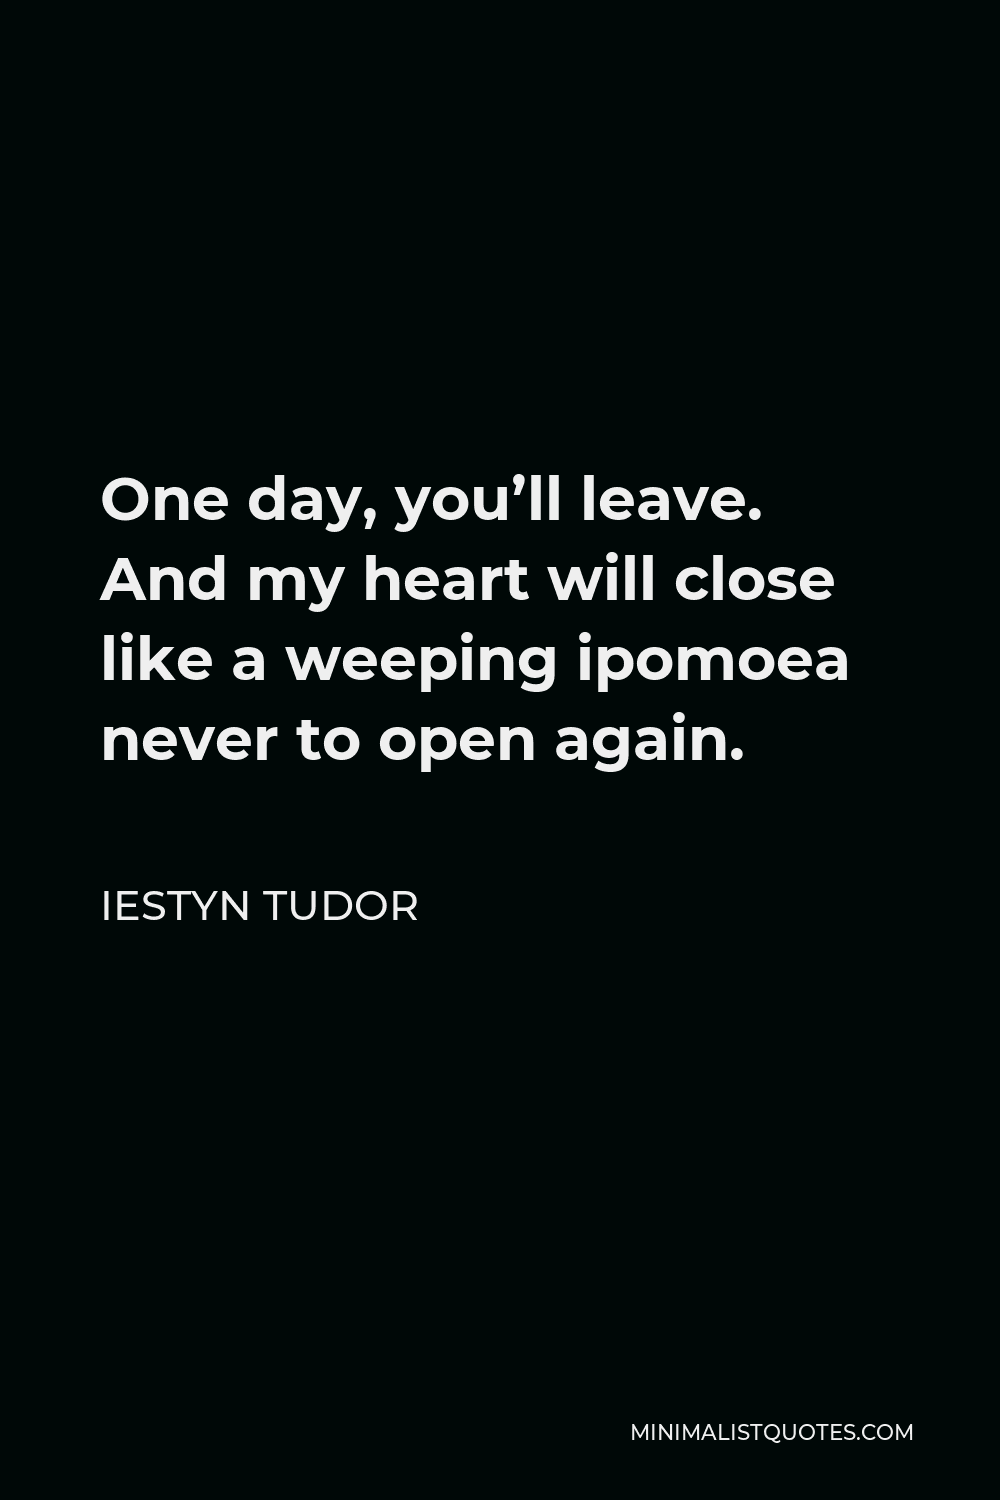 Iestyn Tudor Quote - One day, you’ll leave. And my heart will close like a weeping ipomoea never to open again.